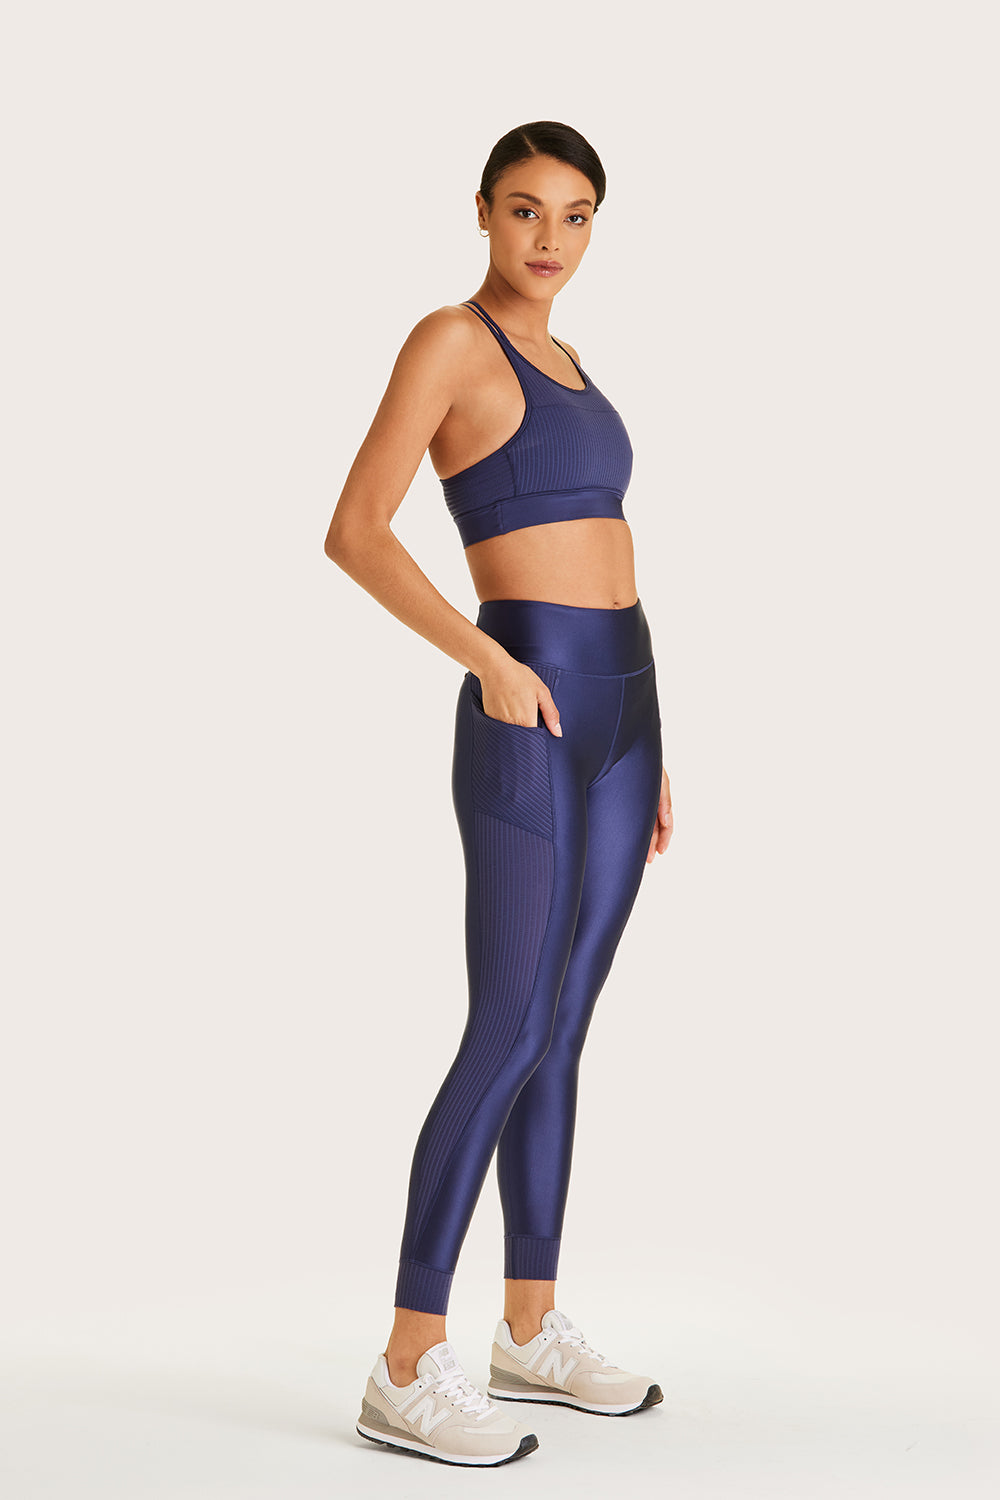 Alala women's legging with mesh panel and pocket in navy